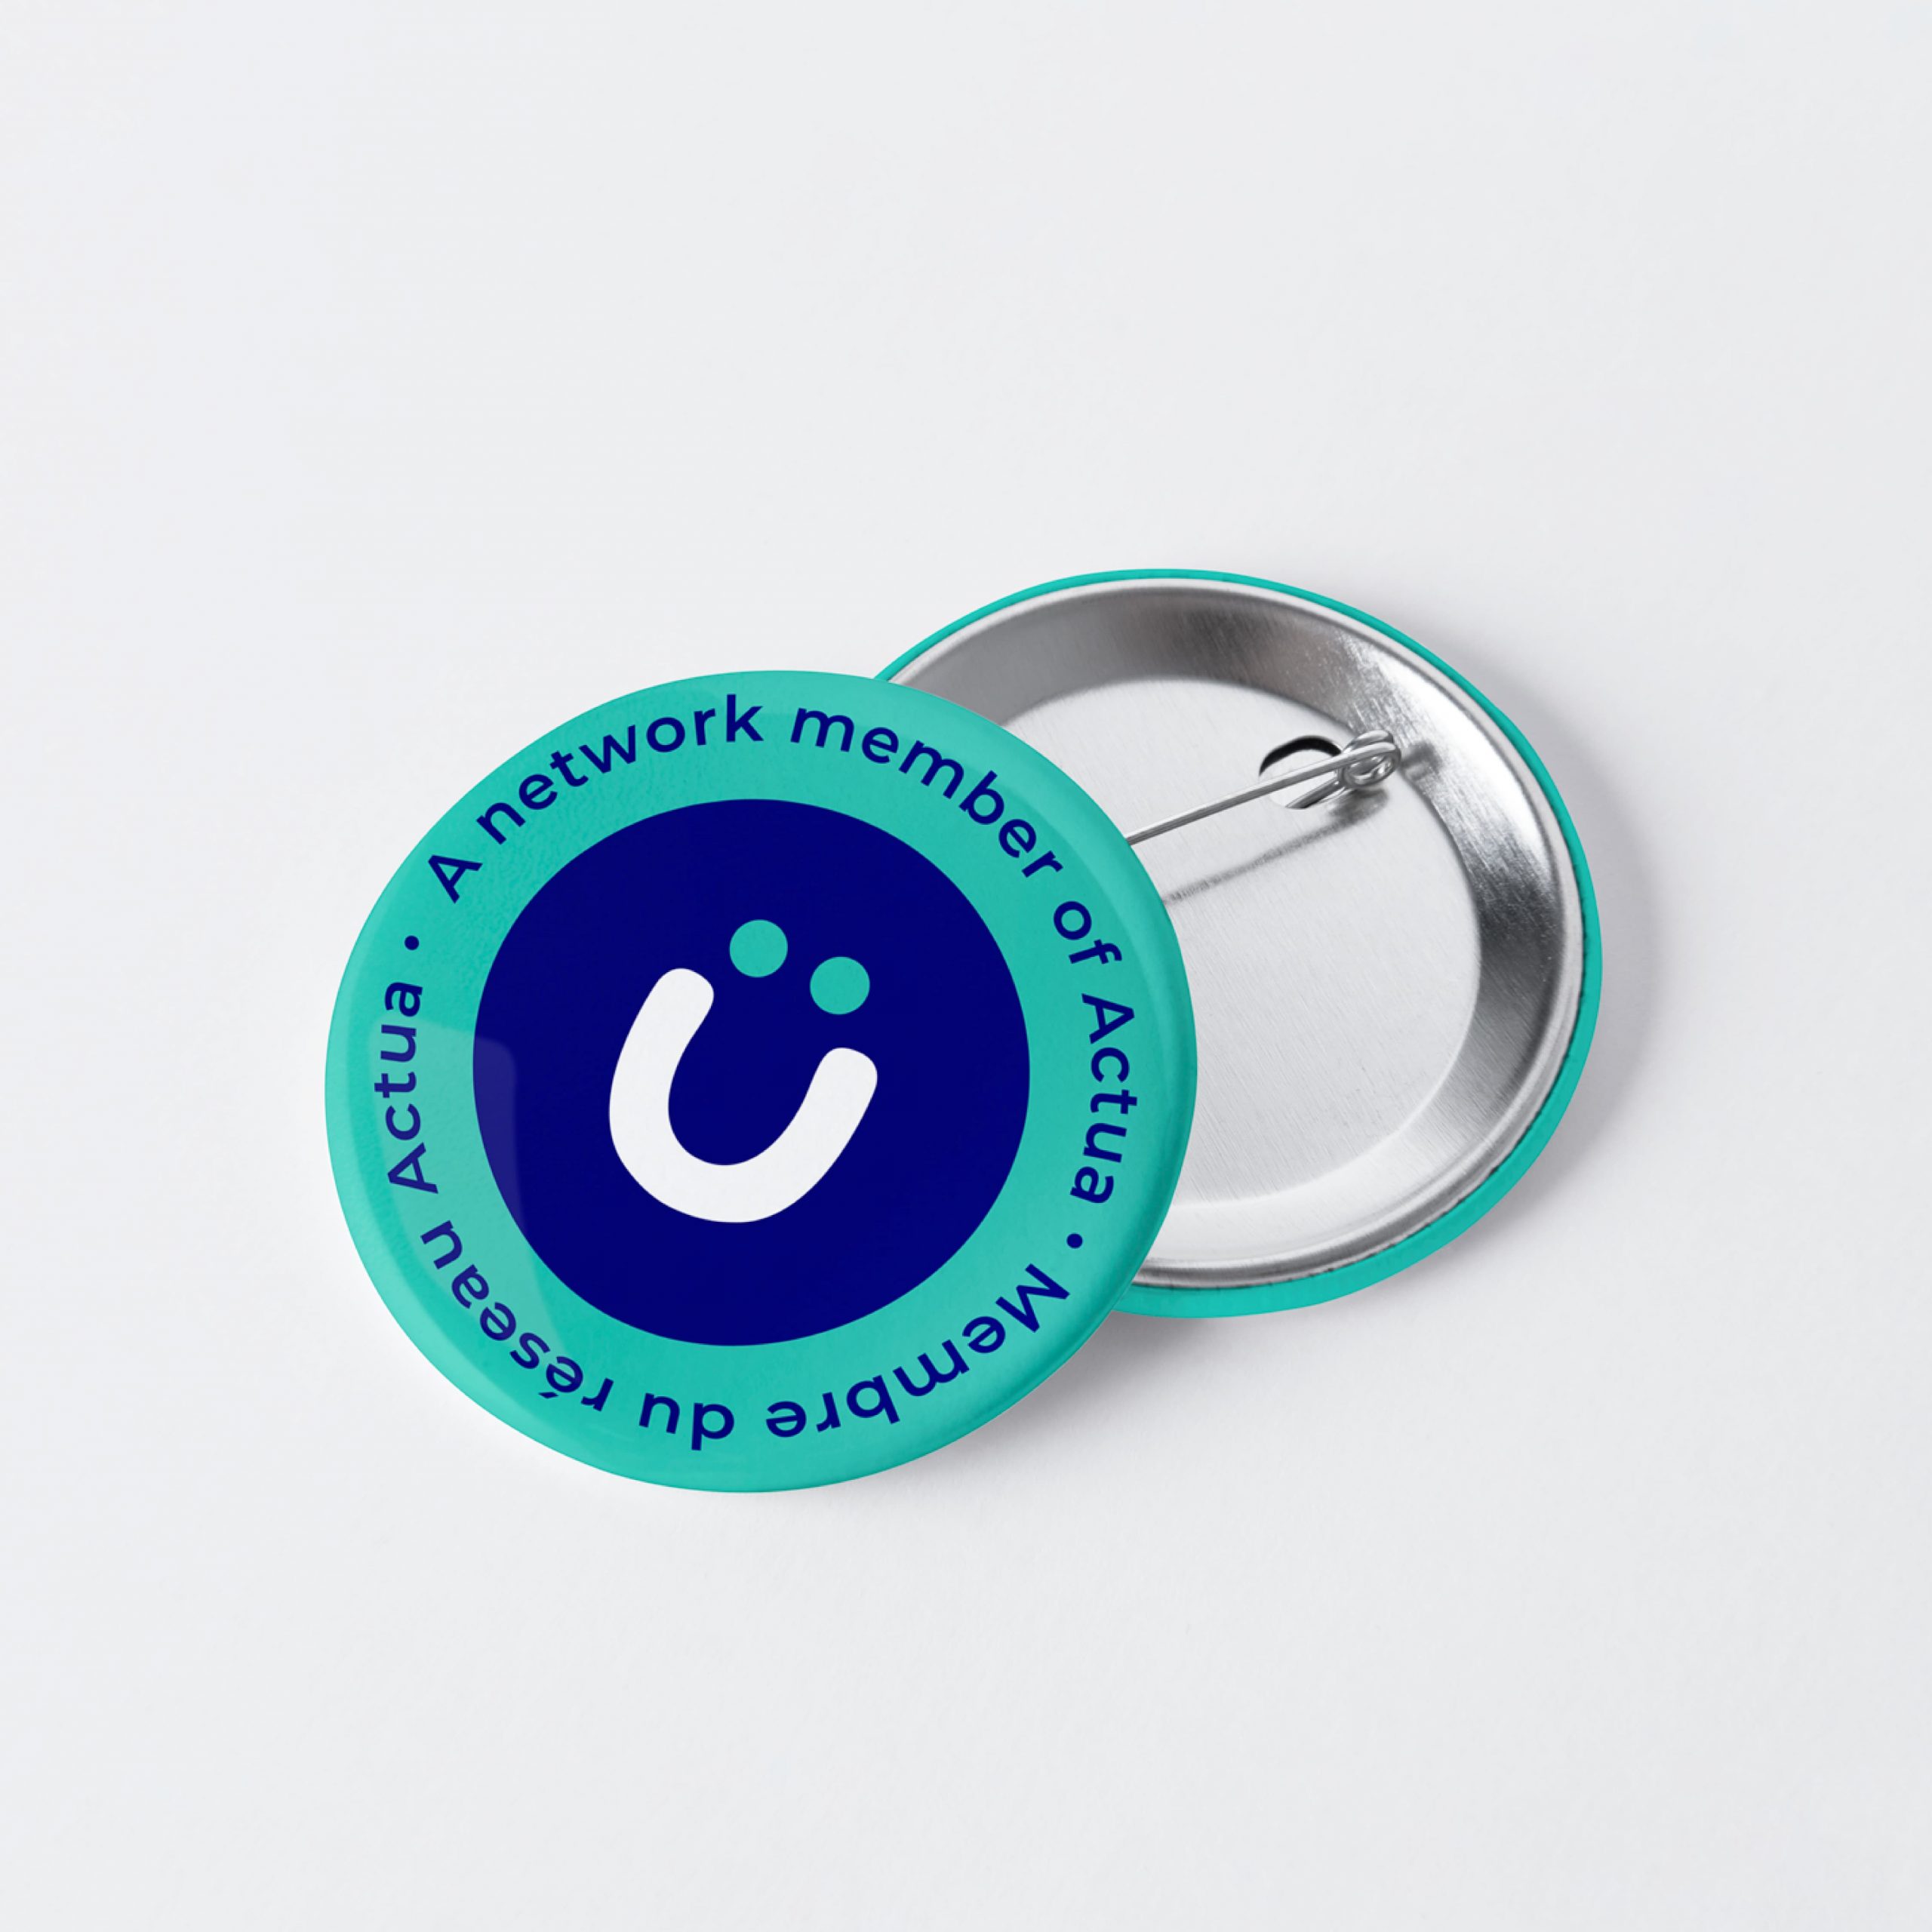 Actua's teal and blue button.